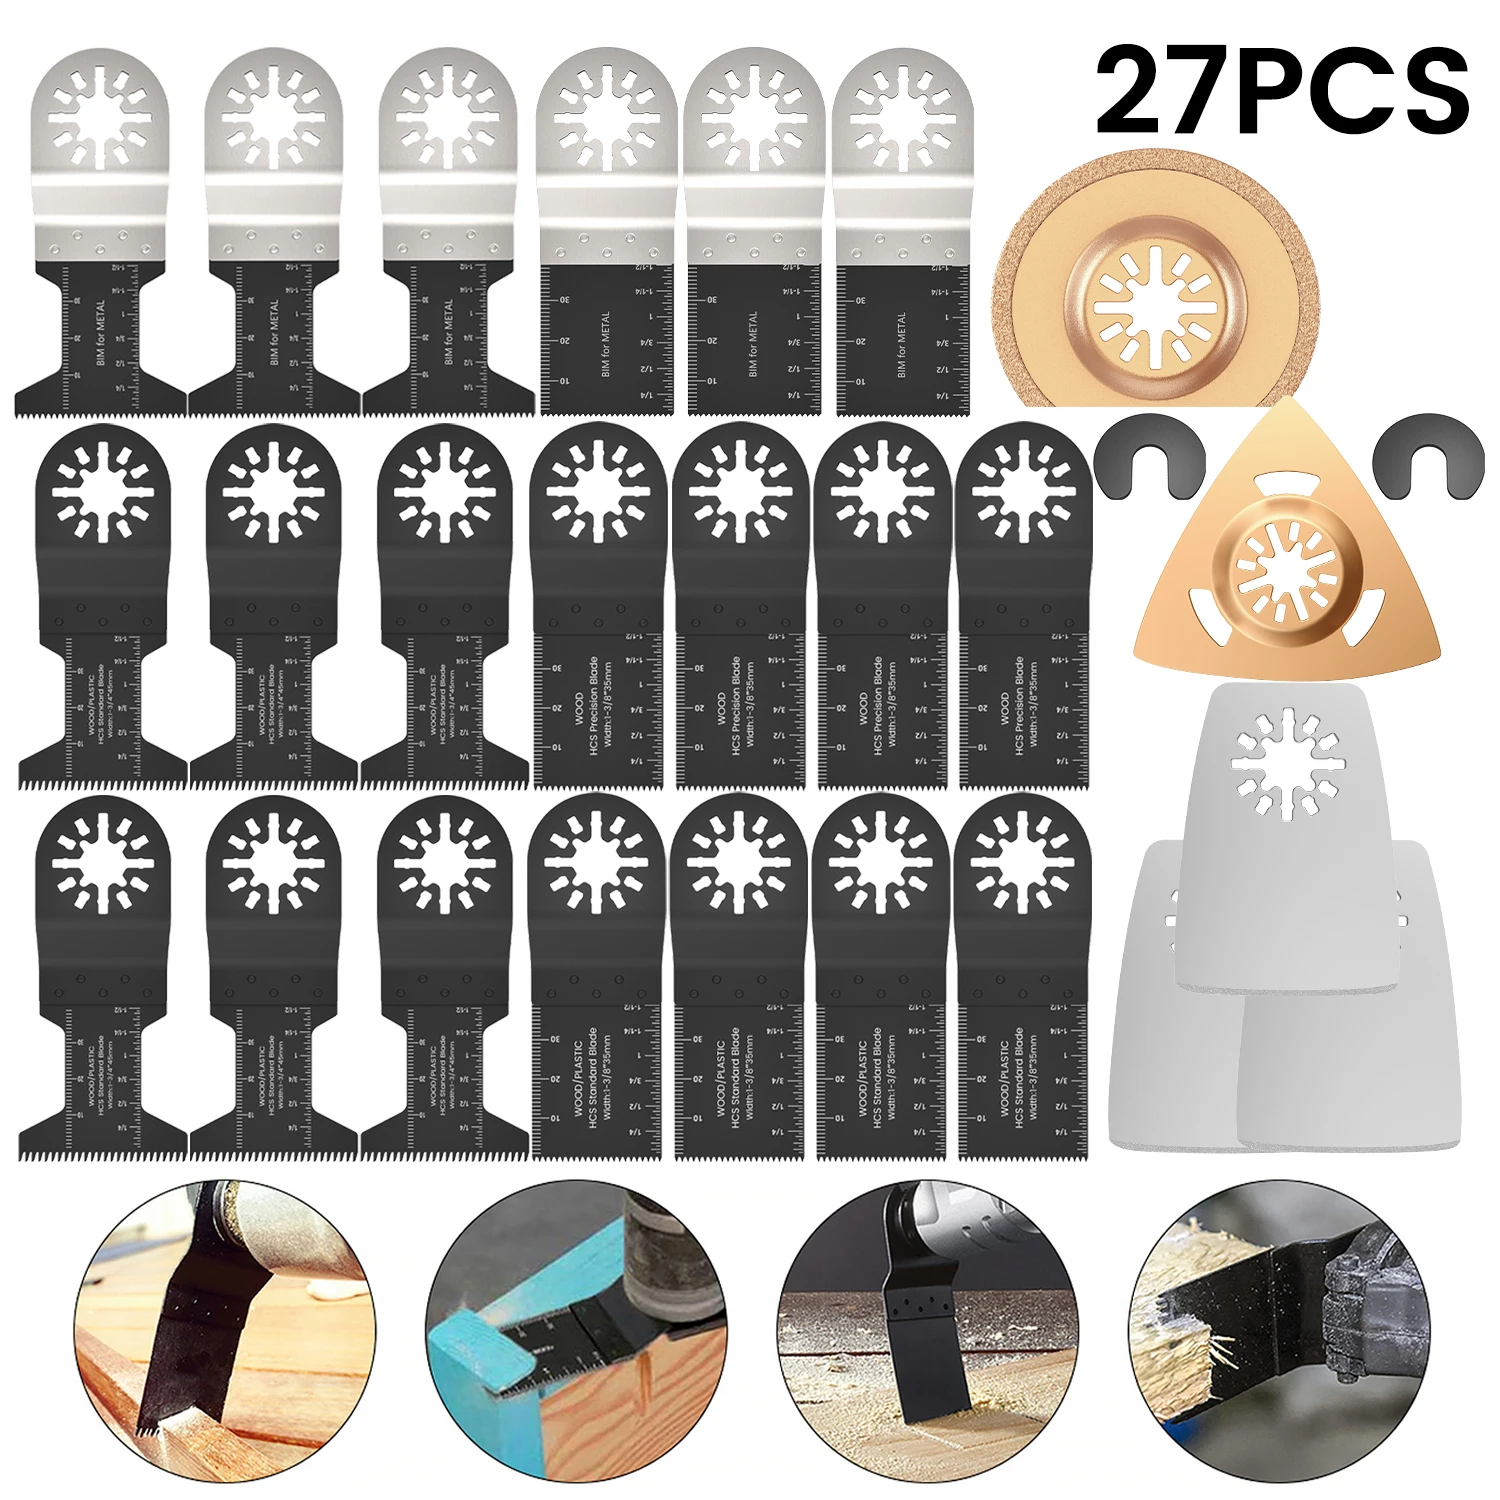 

27pcs Universal Oscillating Multitool Saw Blade Multi-Function Precision Cutting Wood Saw Blades Woodworking Cutter Power Tools